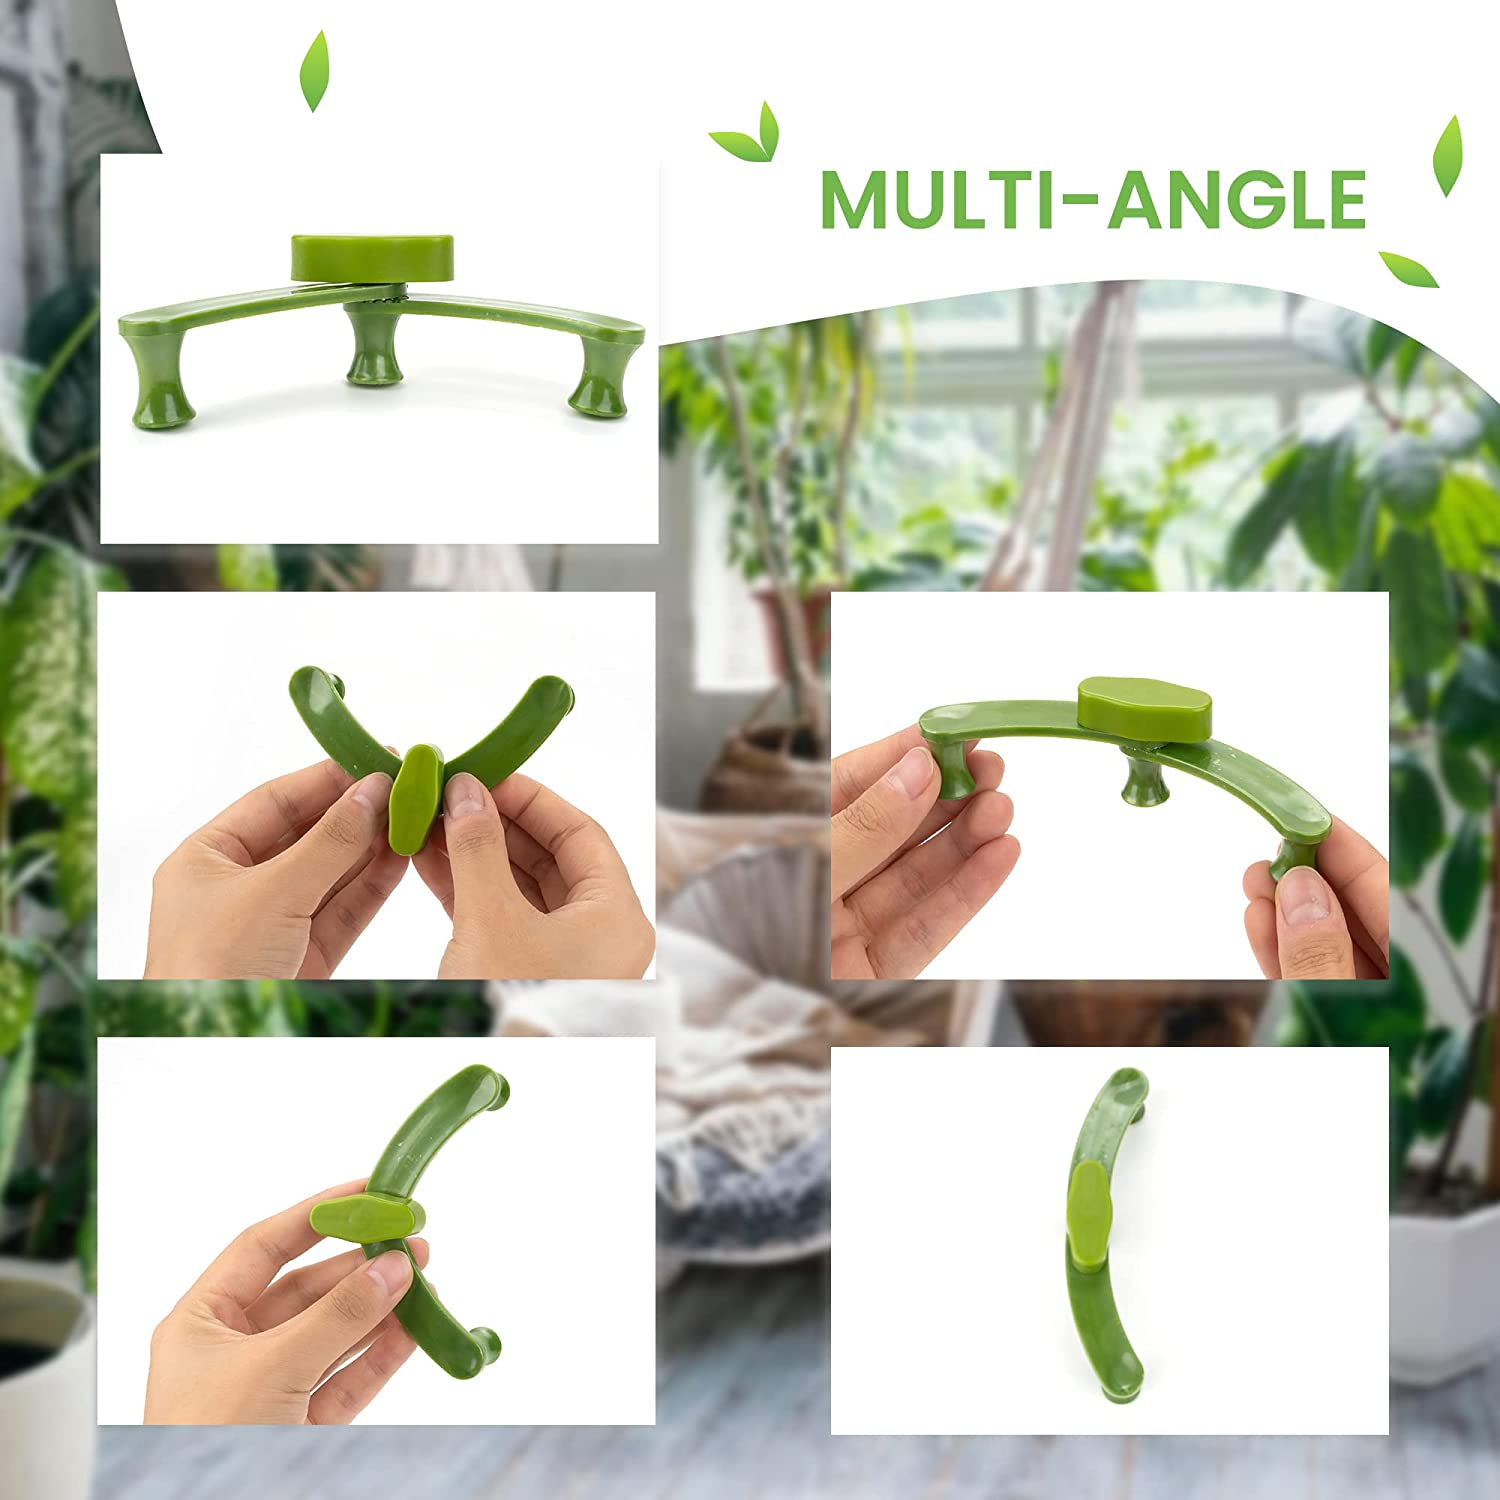 Adjustable angle clips for Low stress training